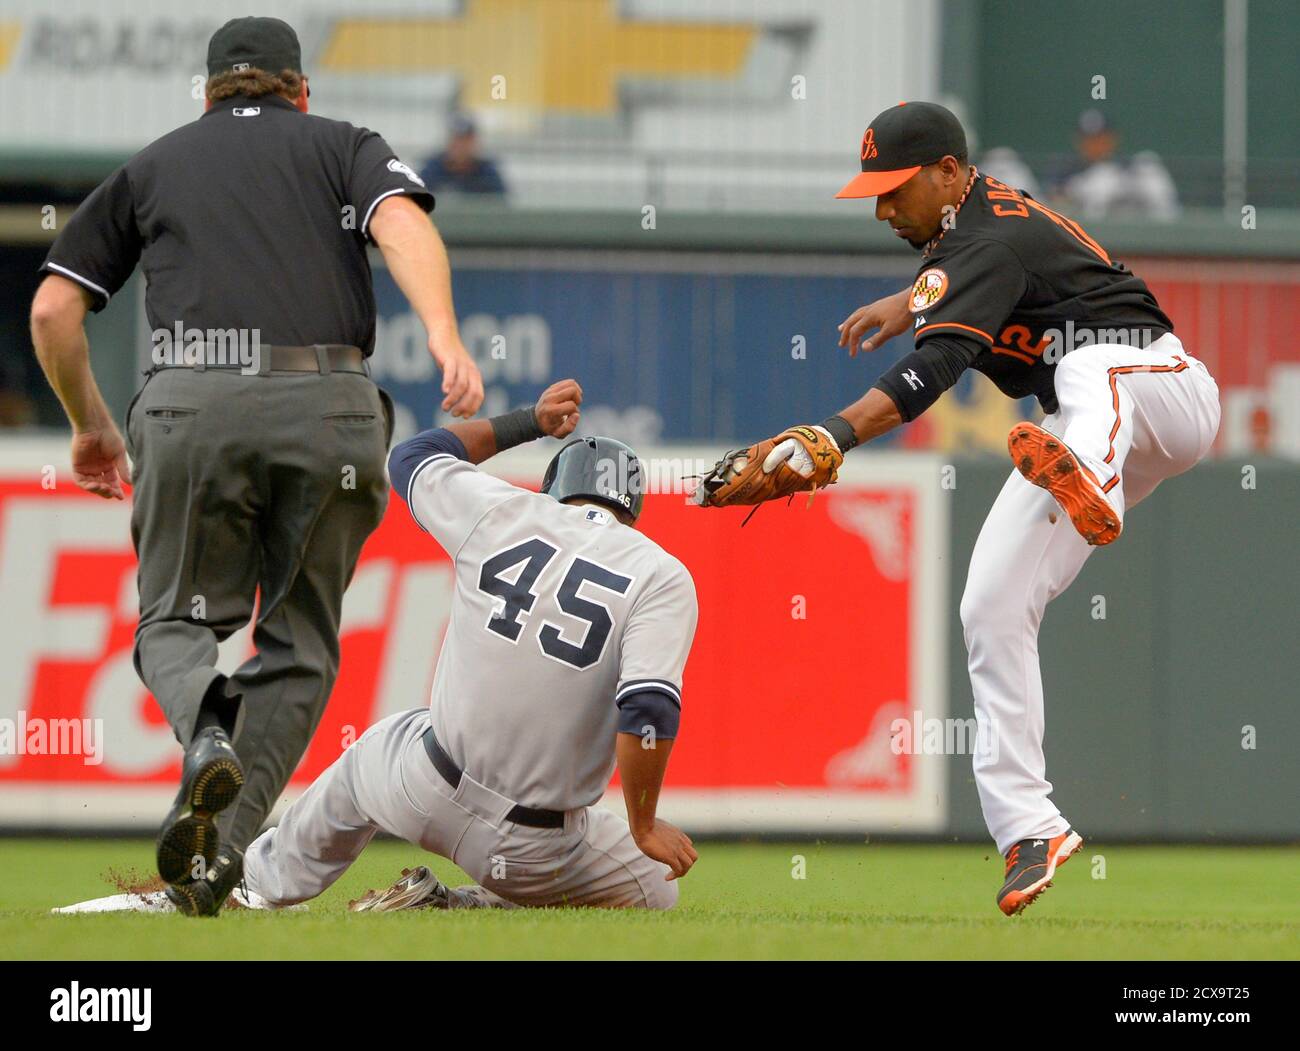 Baltimore Orioles second baseman Alexi Casilla can't get the tag down in time to catch New York Yankees baserunner Zoilo Almonte (C) on a stolen base during the second inning of their MLB American League baseball game in Baltimore, Maryland June 28, 2013.  REUTERS/Doug Kapustin (UNITED STATES - Tags: SPORT BASEBALL) Stock Photo